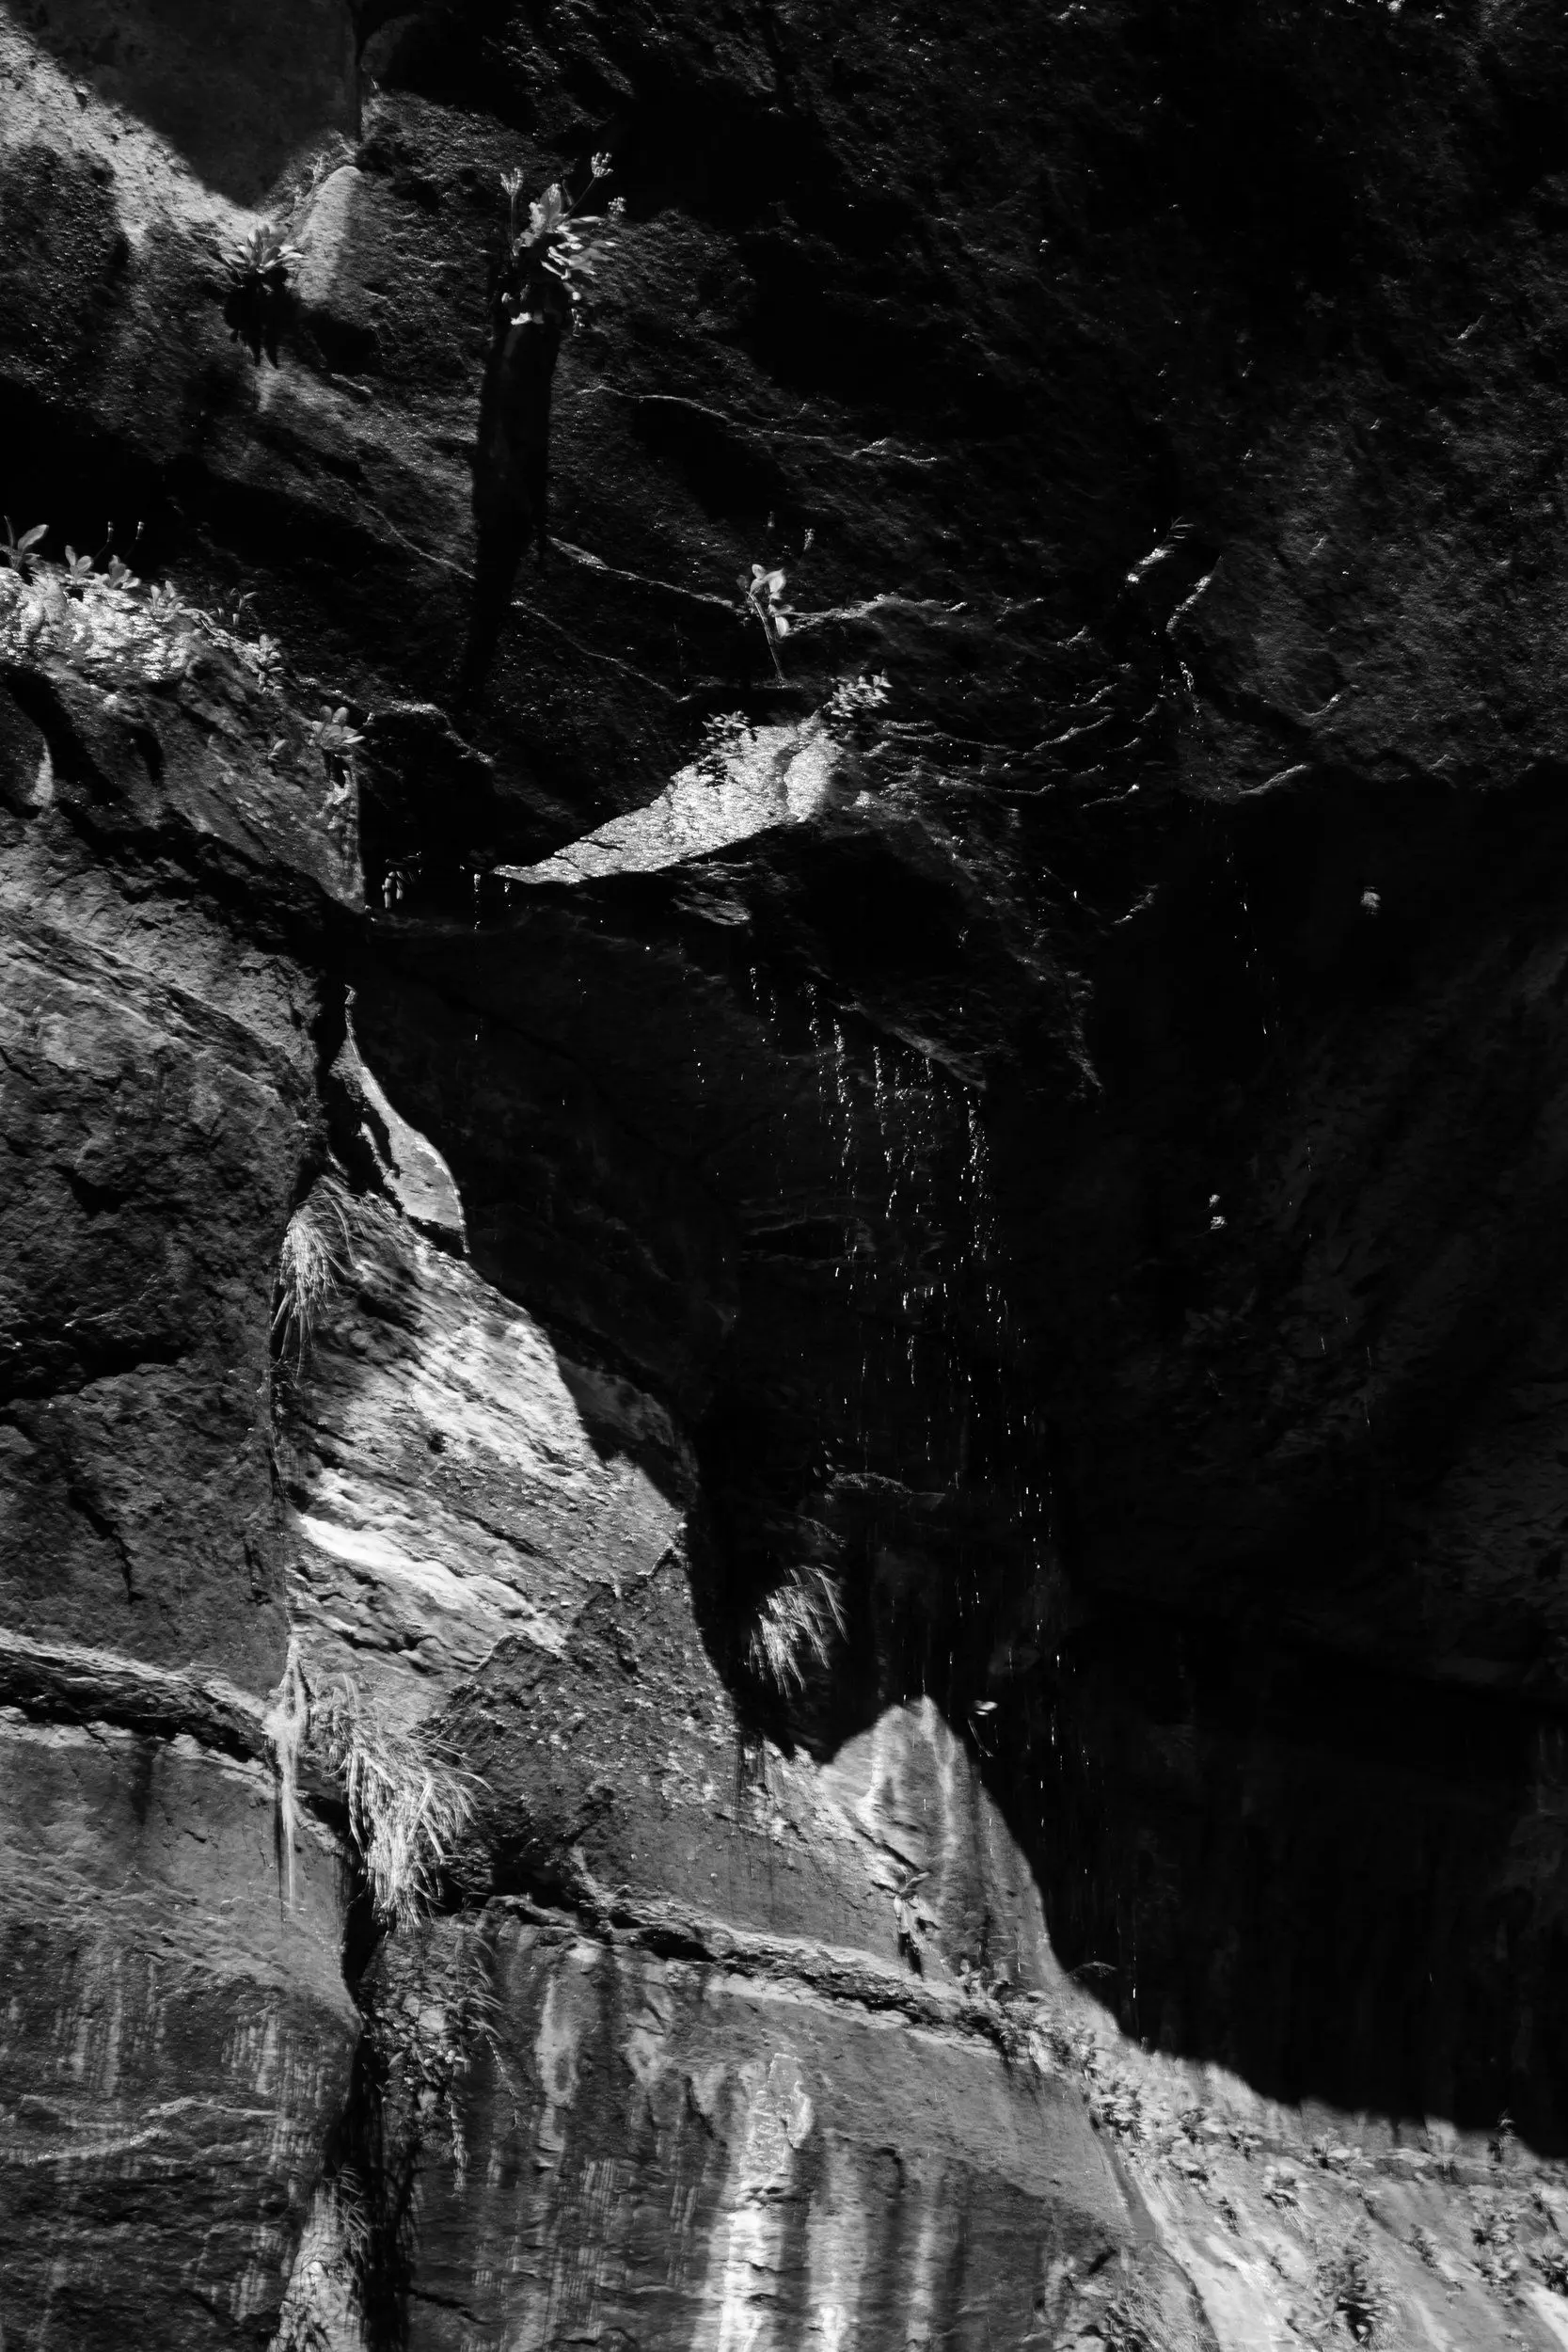 Water drips down the walls of Emerald Pool in black and white.